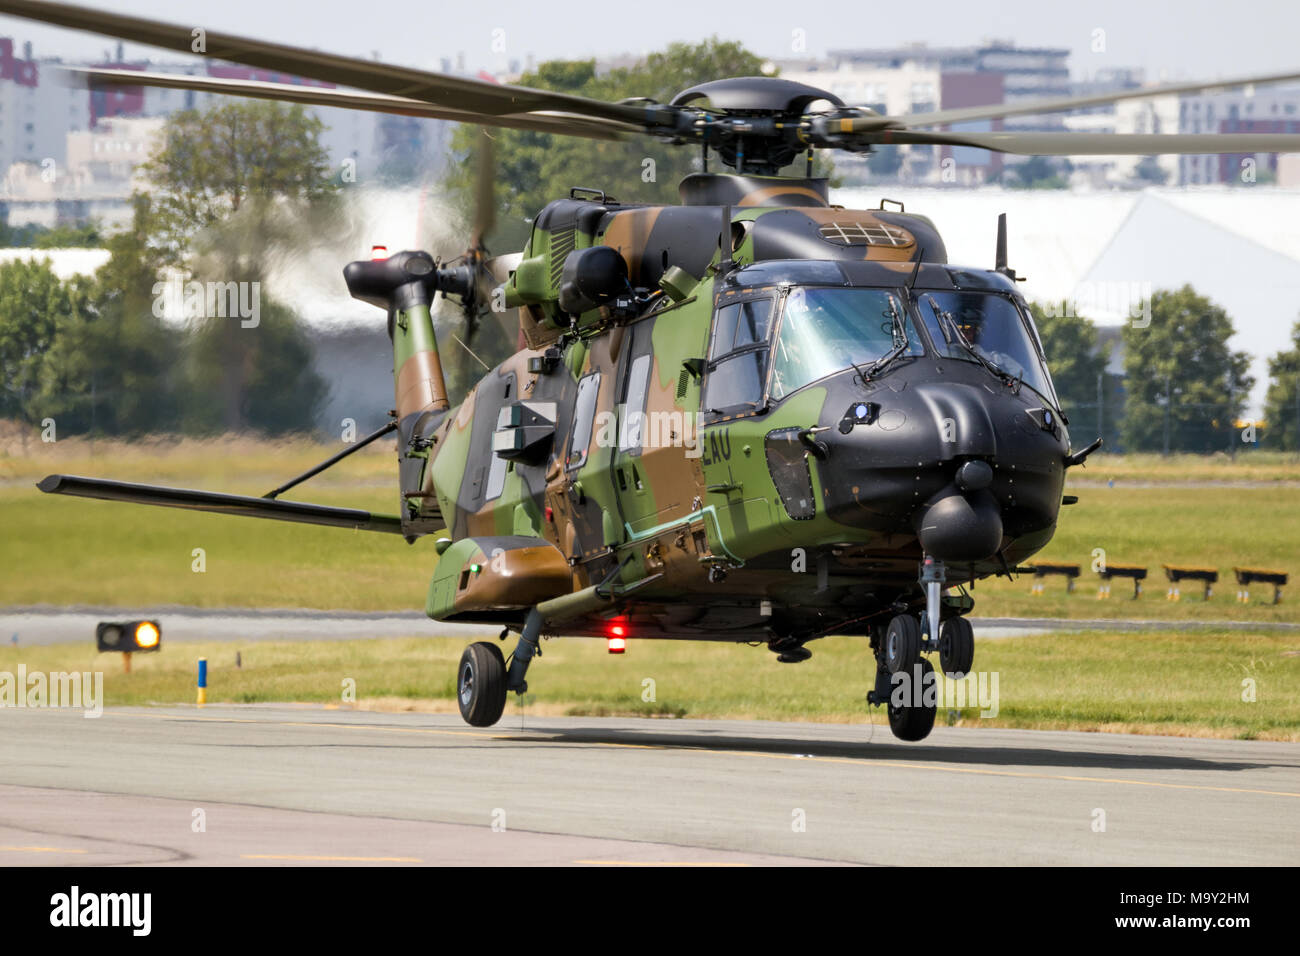 PARIS, FRANCE - JUN 22, 2017: French Army NHIndustries NH90-TTH Caiman helicopter landing during the Paris Air Show 2017 Stock Photo